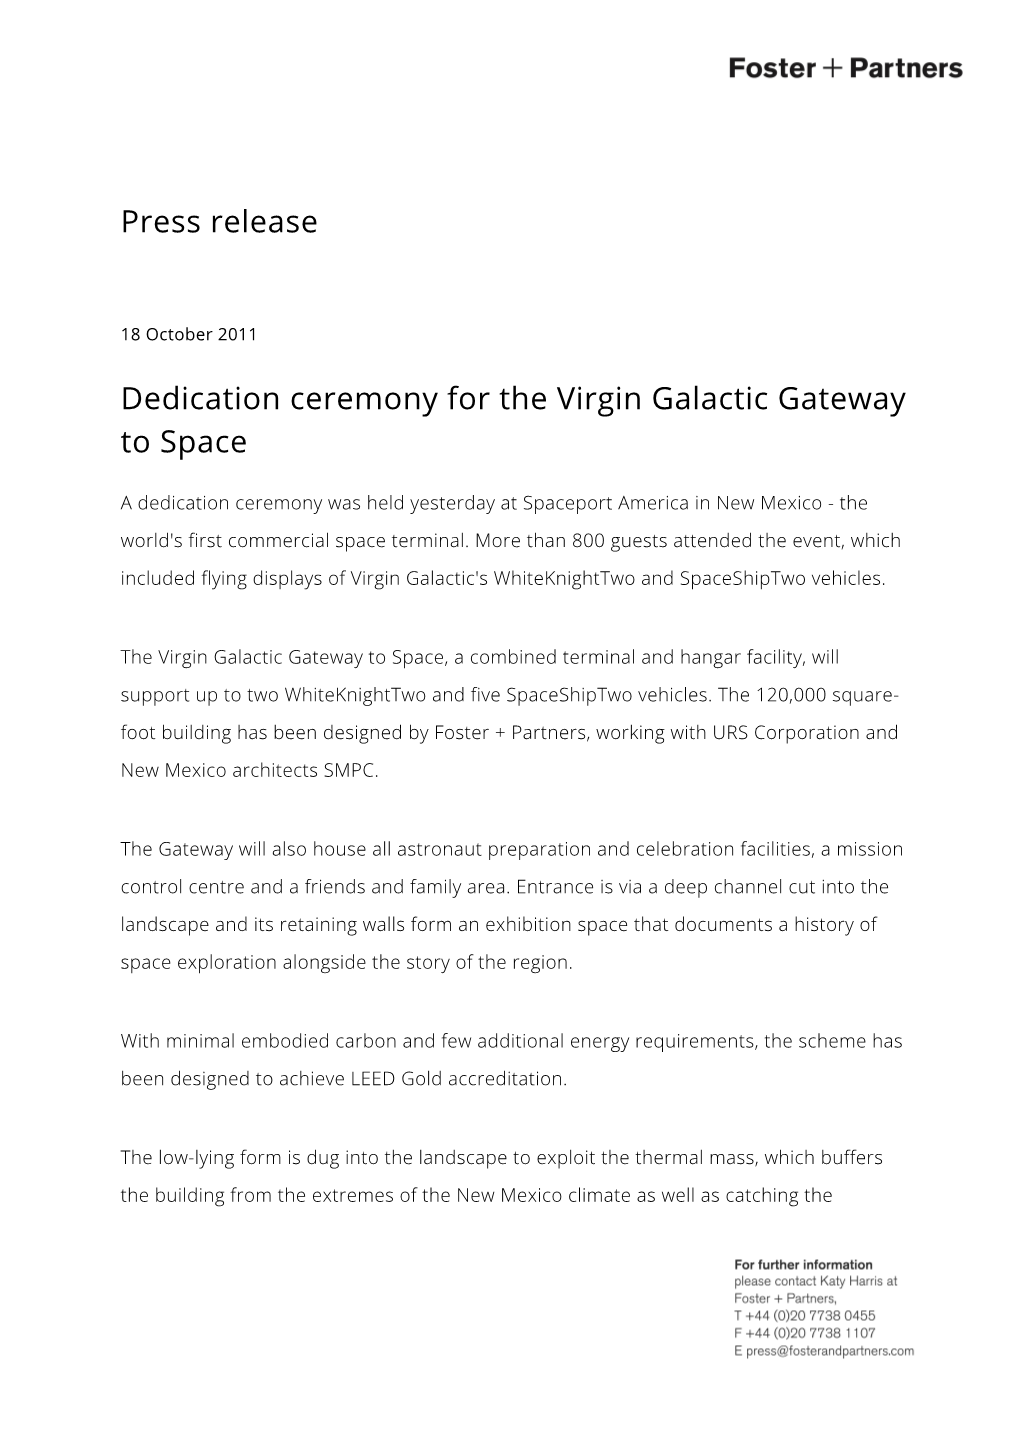 Press Release Dedication Ceremony for the Virgin Galactic Gateway to Space